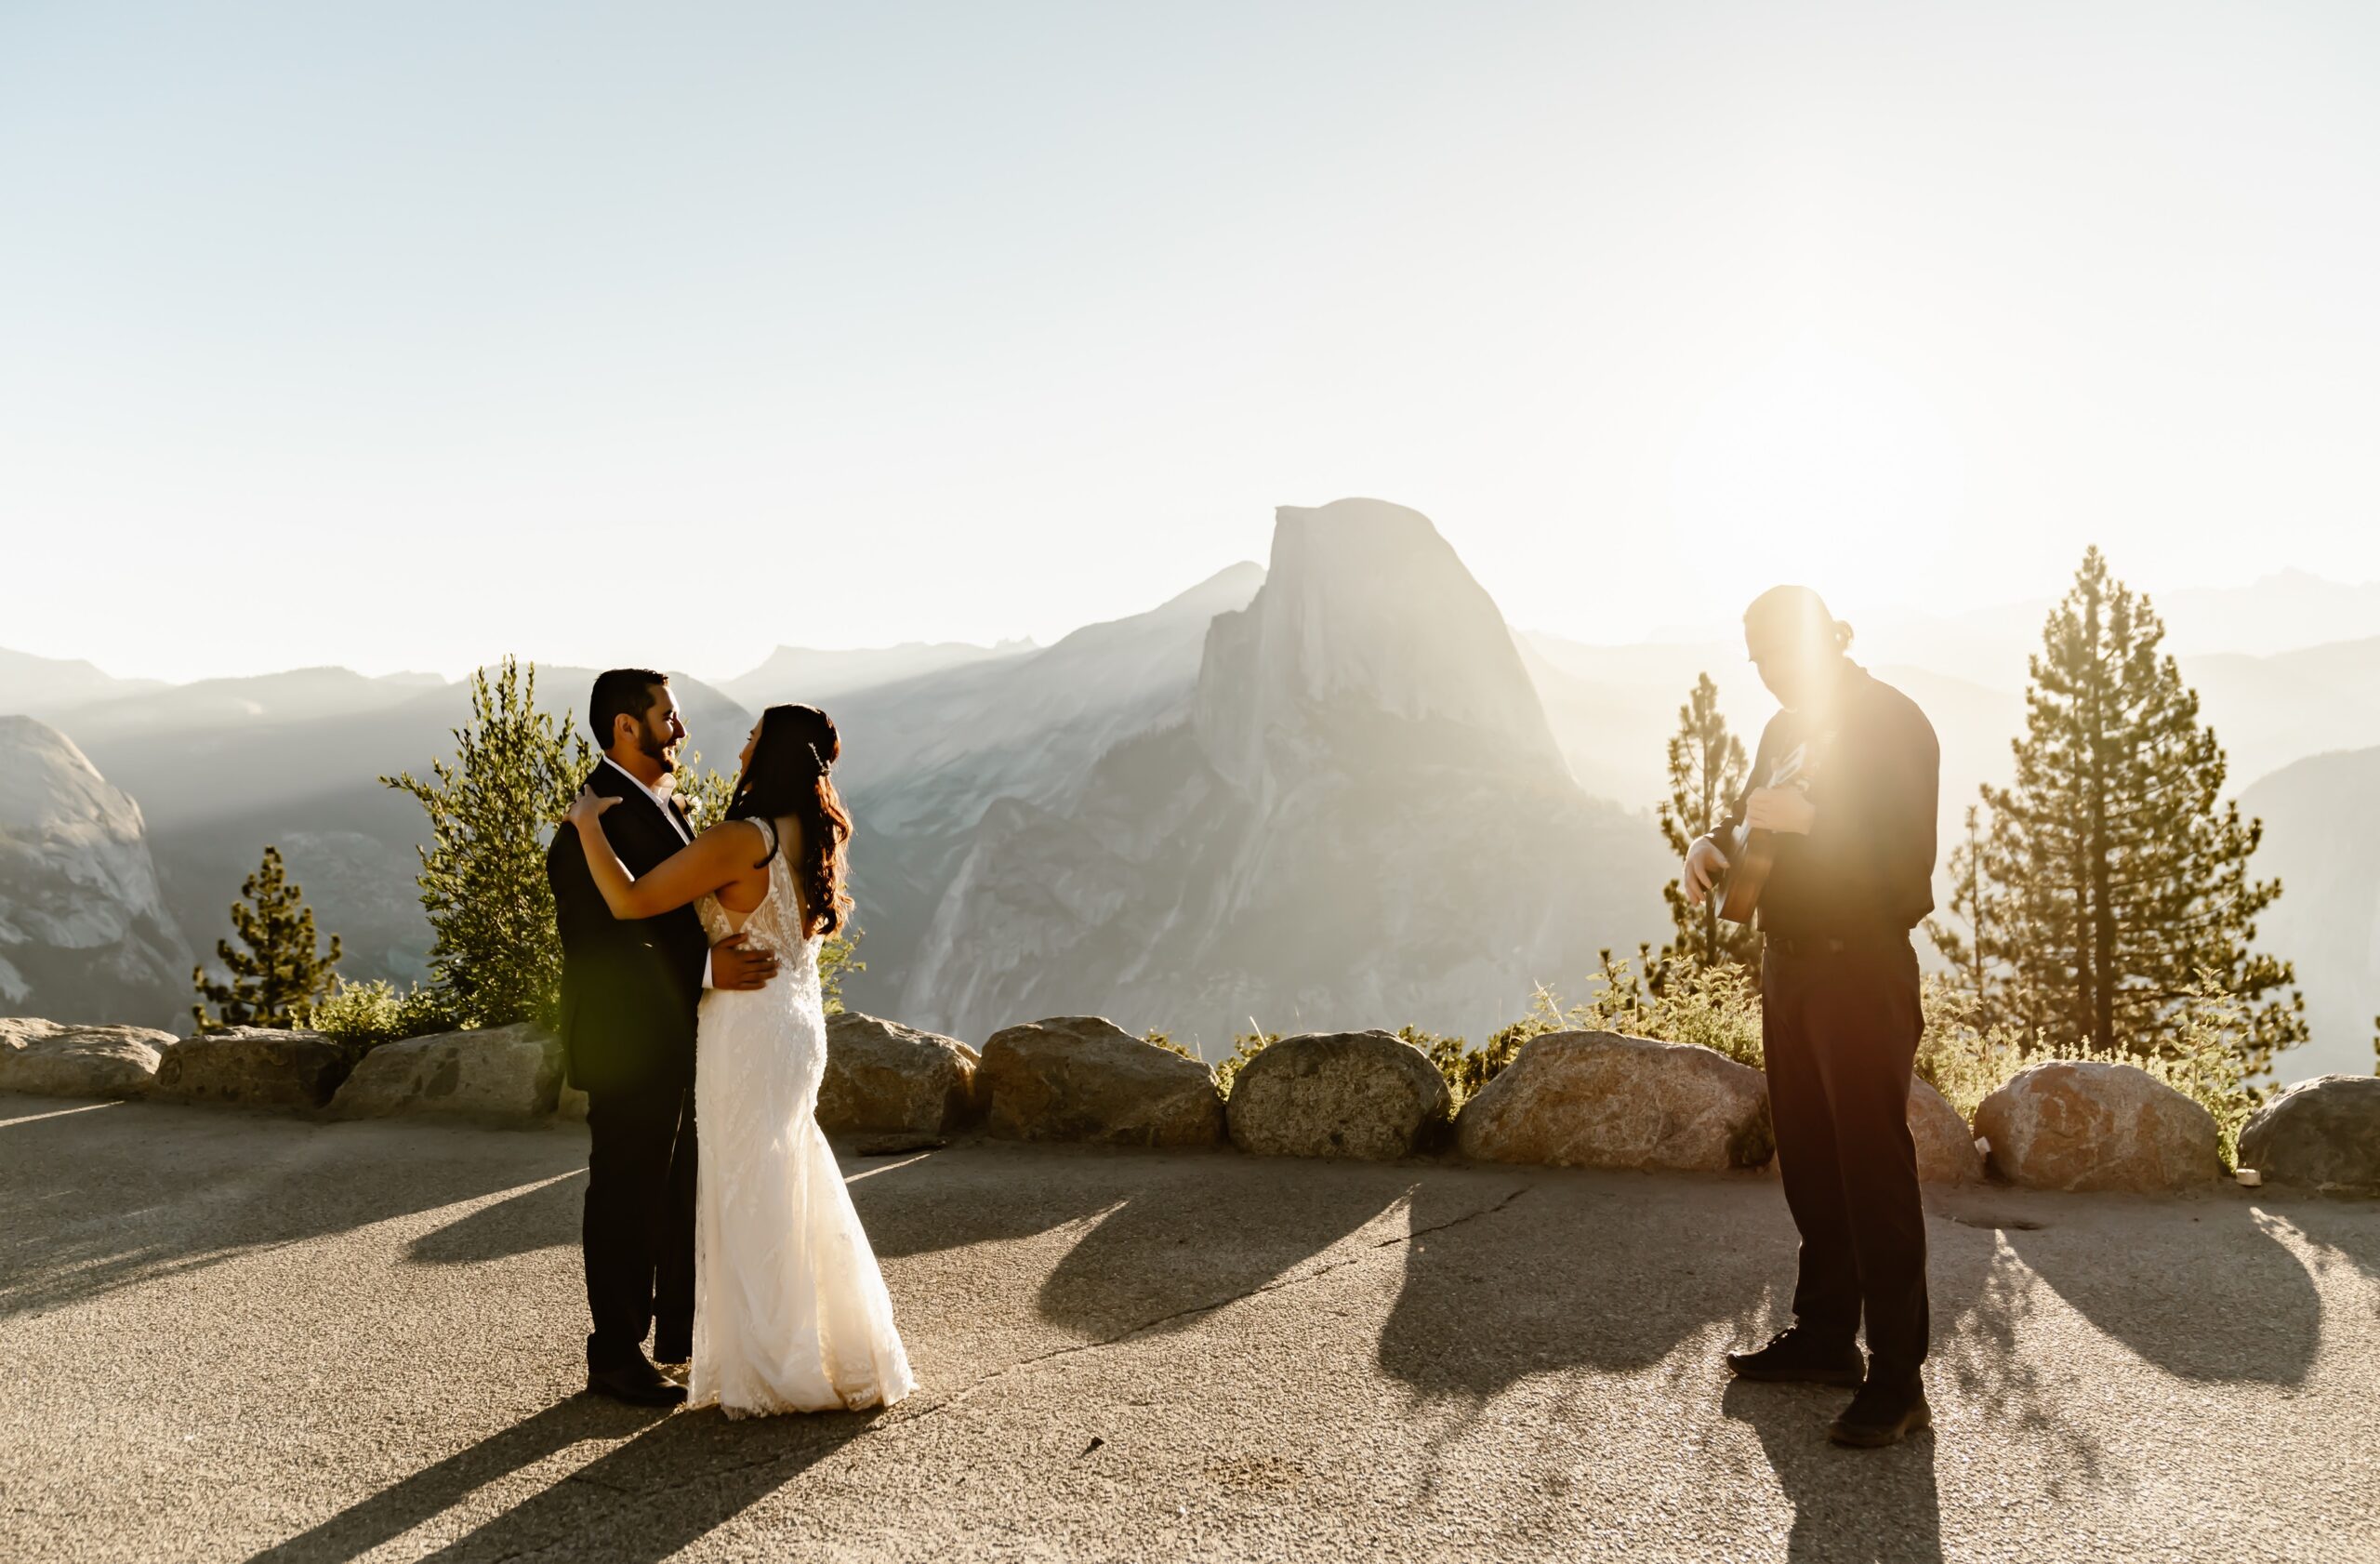 Bride and groom have intimate wedding dance in Yosemite